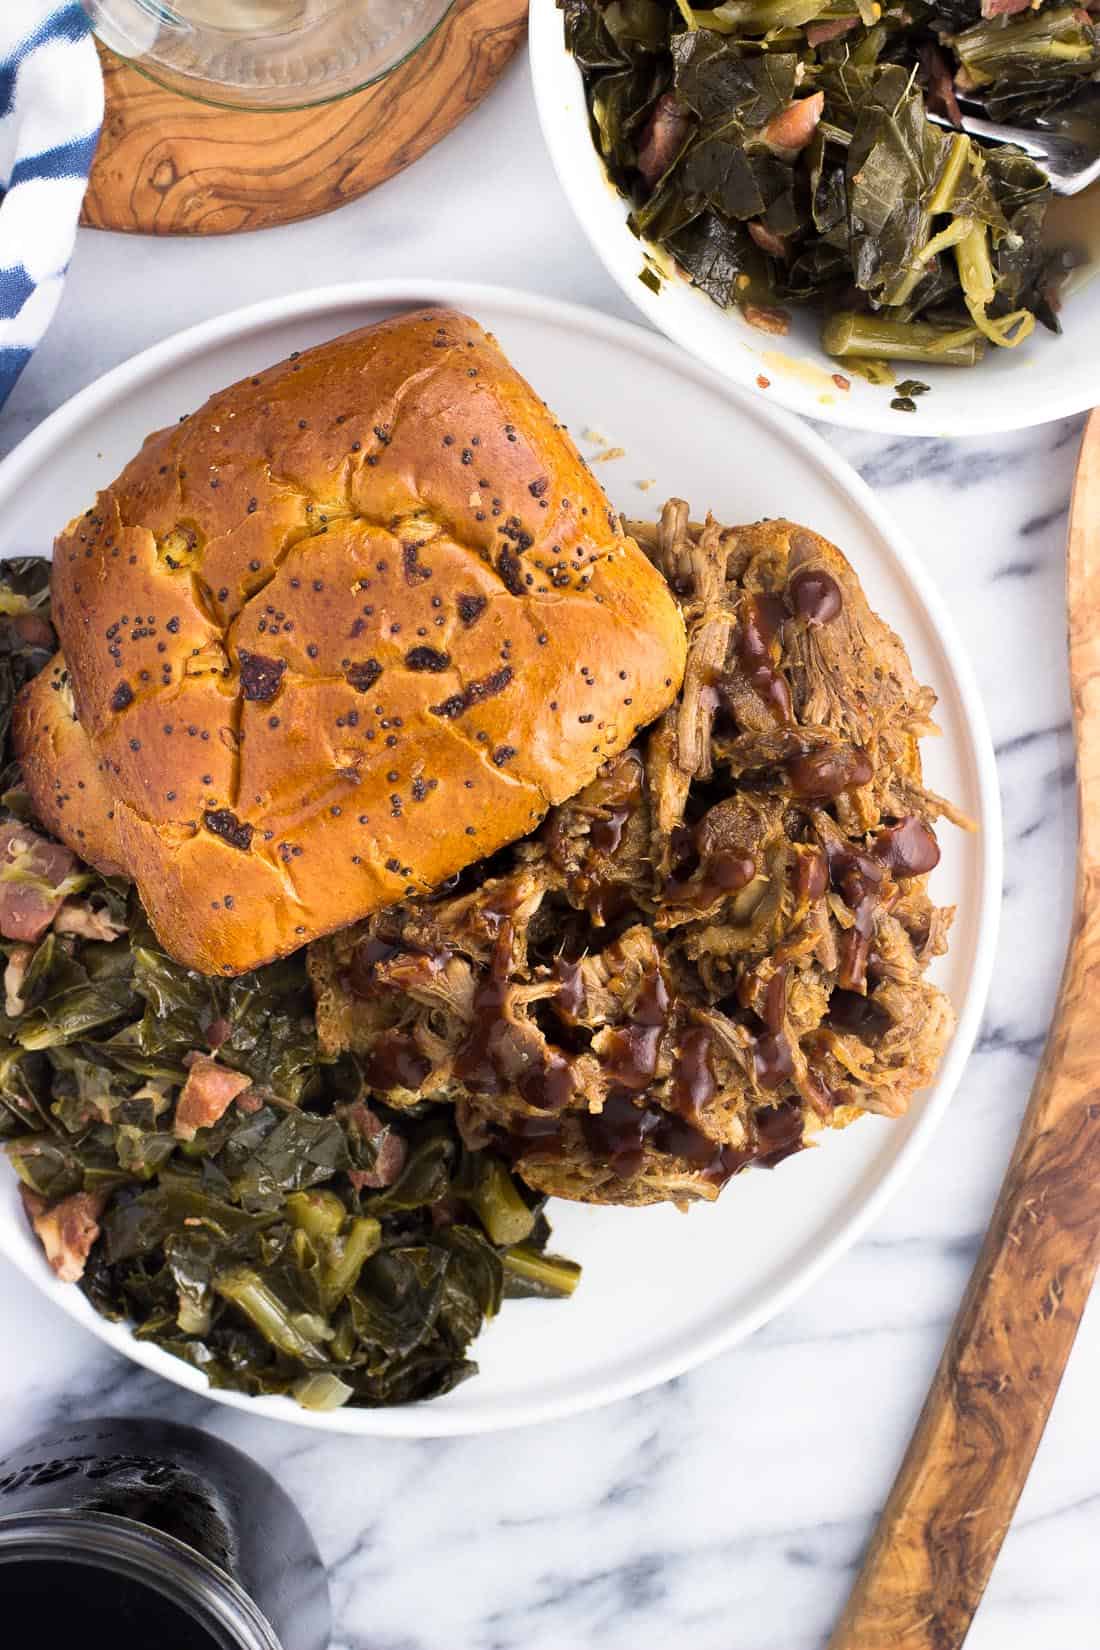 An overhead picture of a pulled pork sandwich on an onion roll on a plate with a side of southern greens